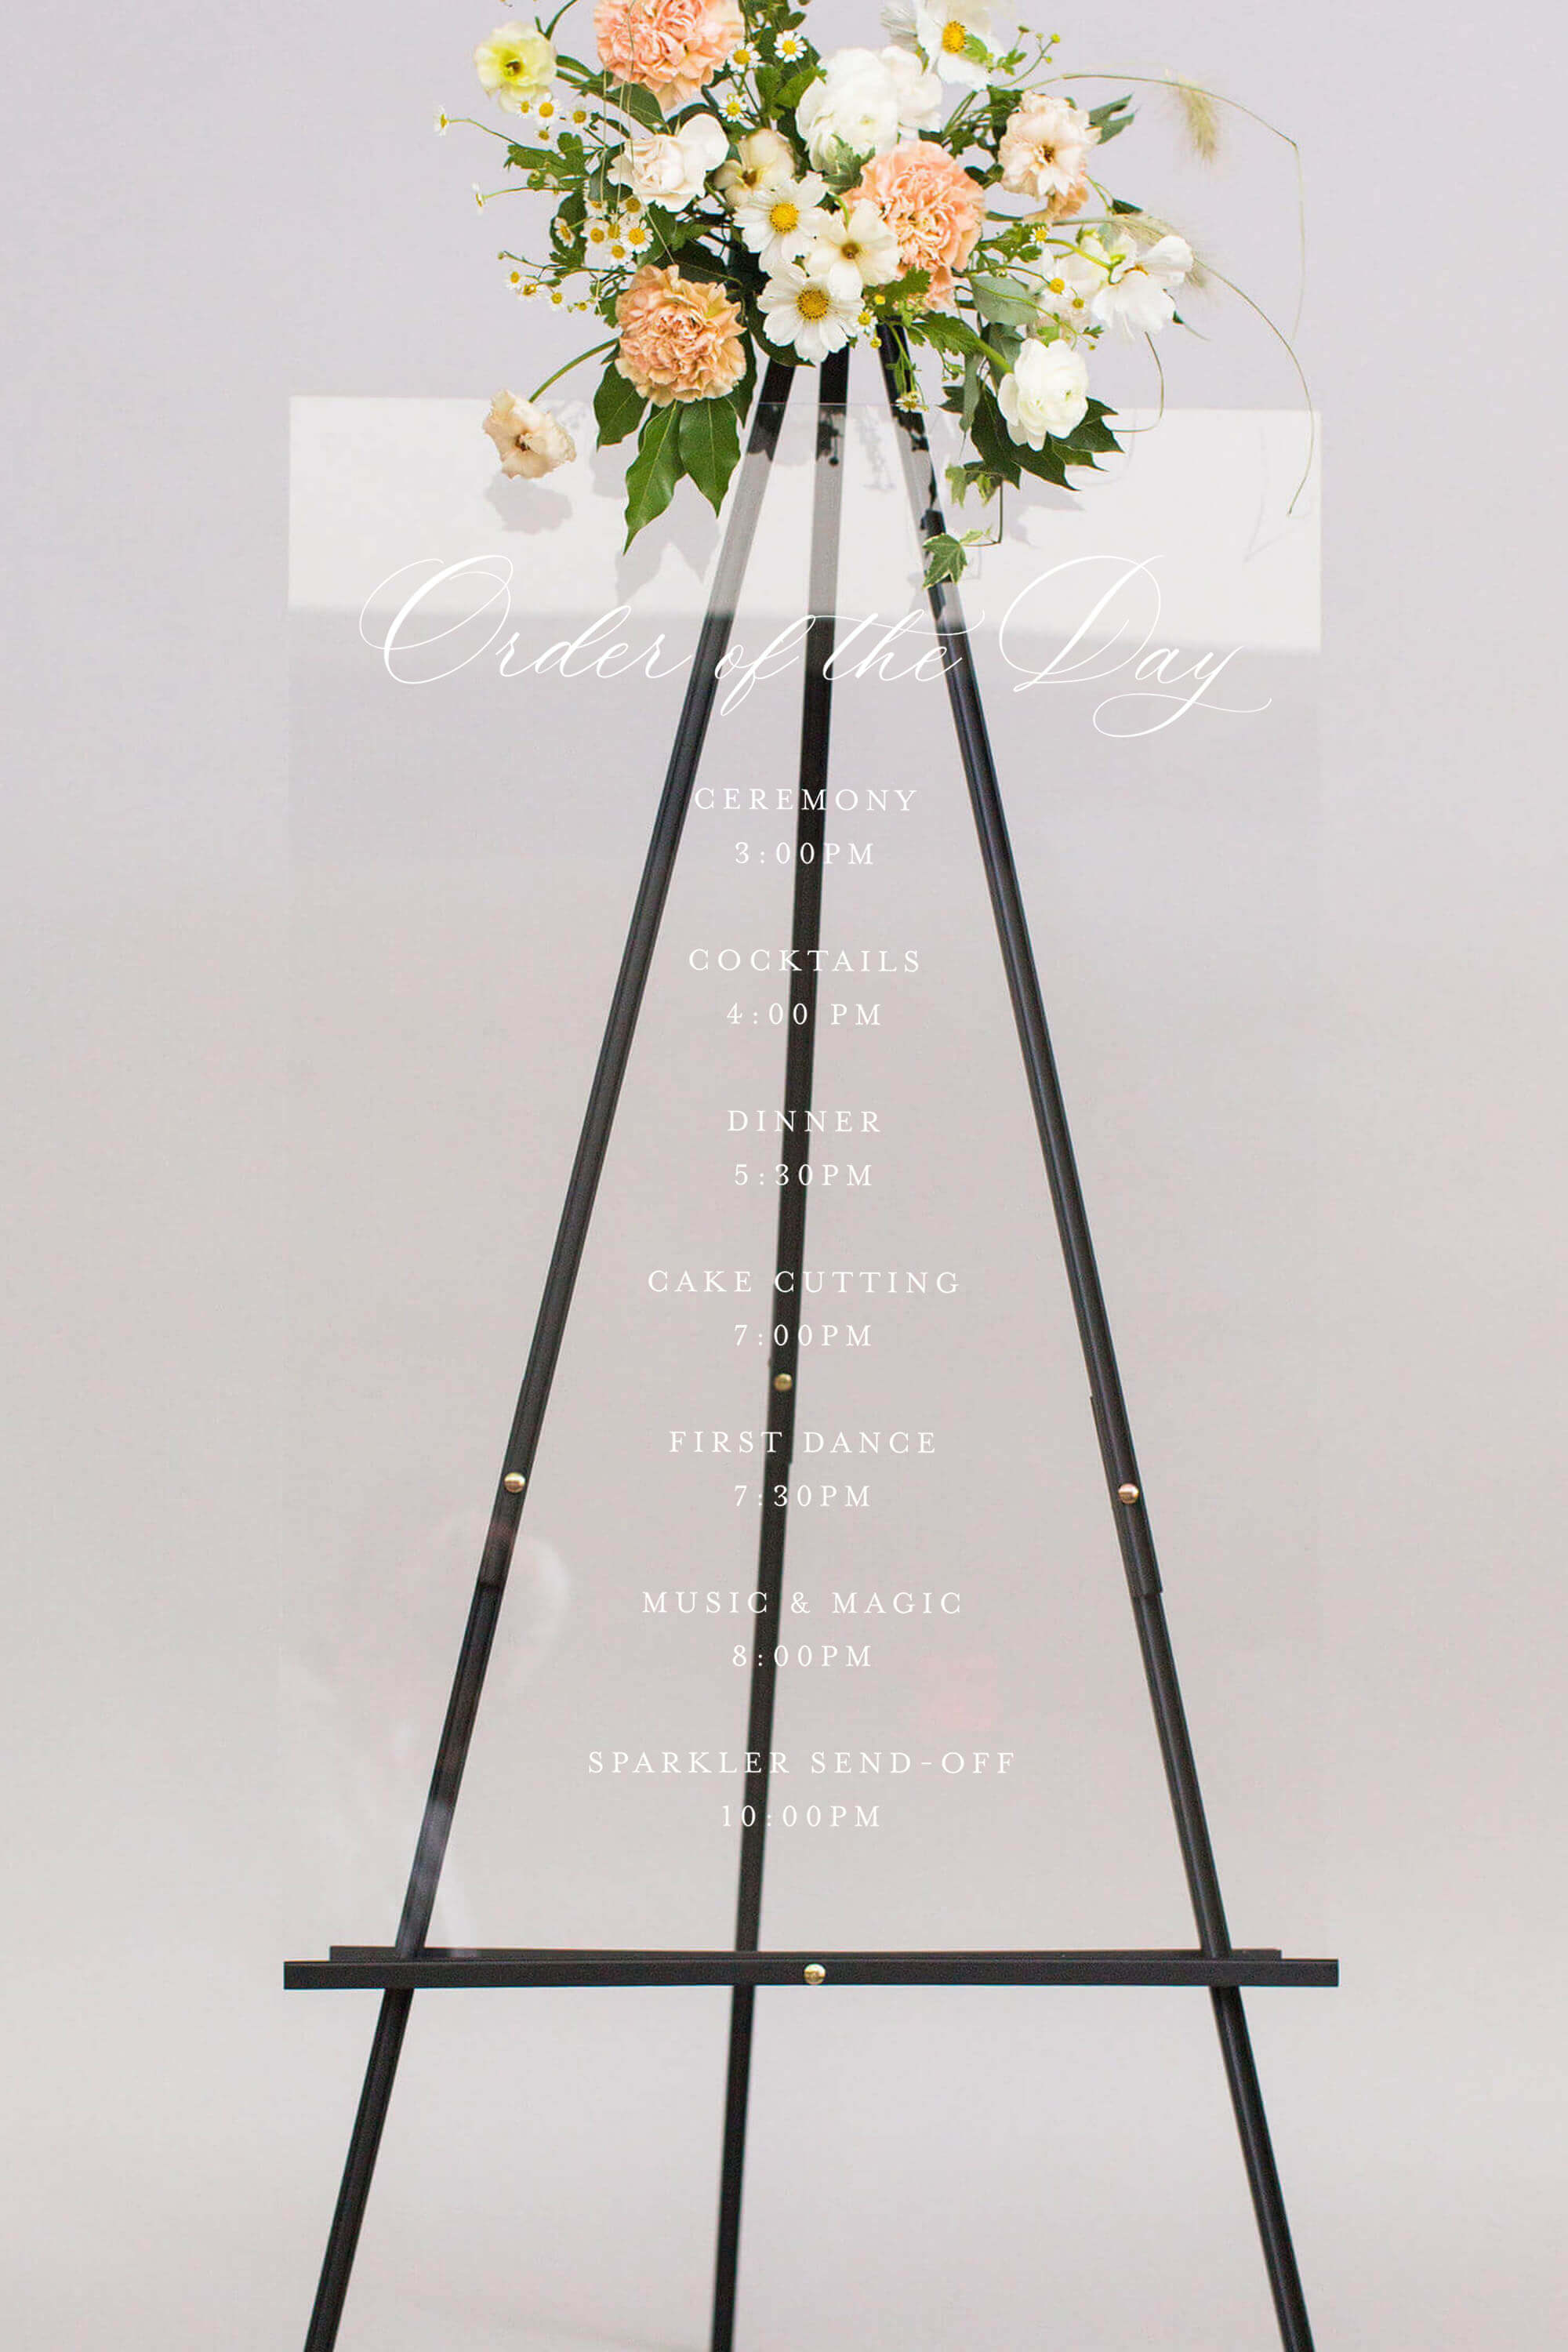 Glass Wedding Schedule Sign Acrylic Lily Roe Co.